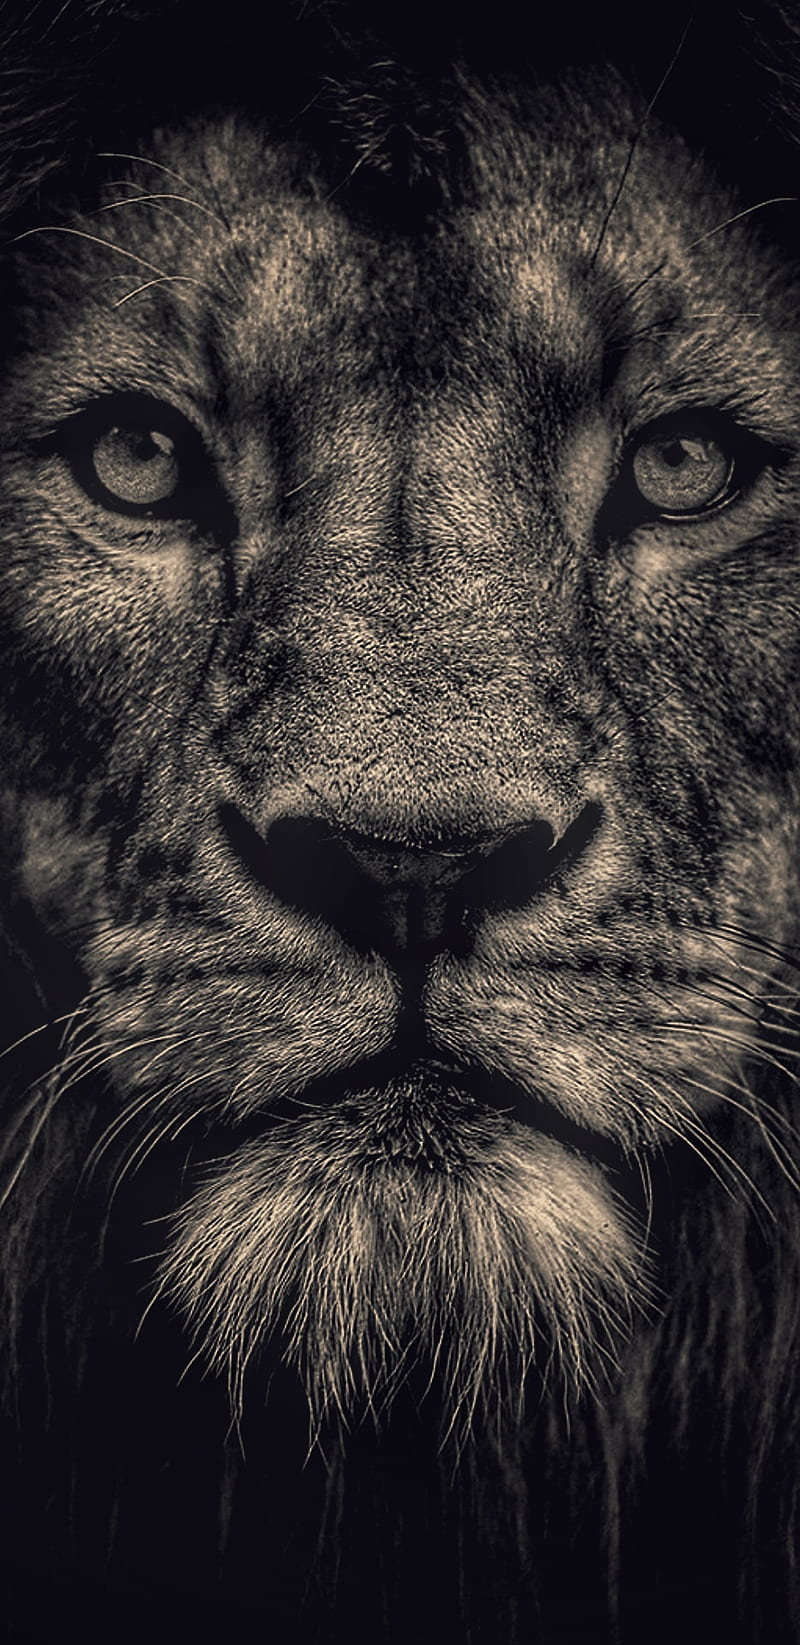 HD wallpaper Lion drawing in black and white tribal tattoo head icon   Wallpaper Flare